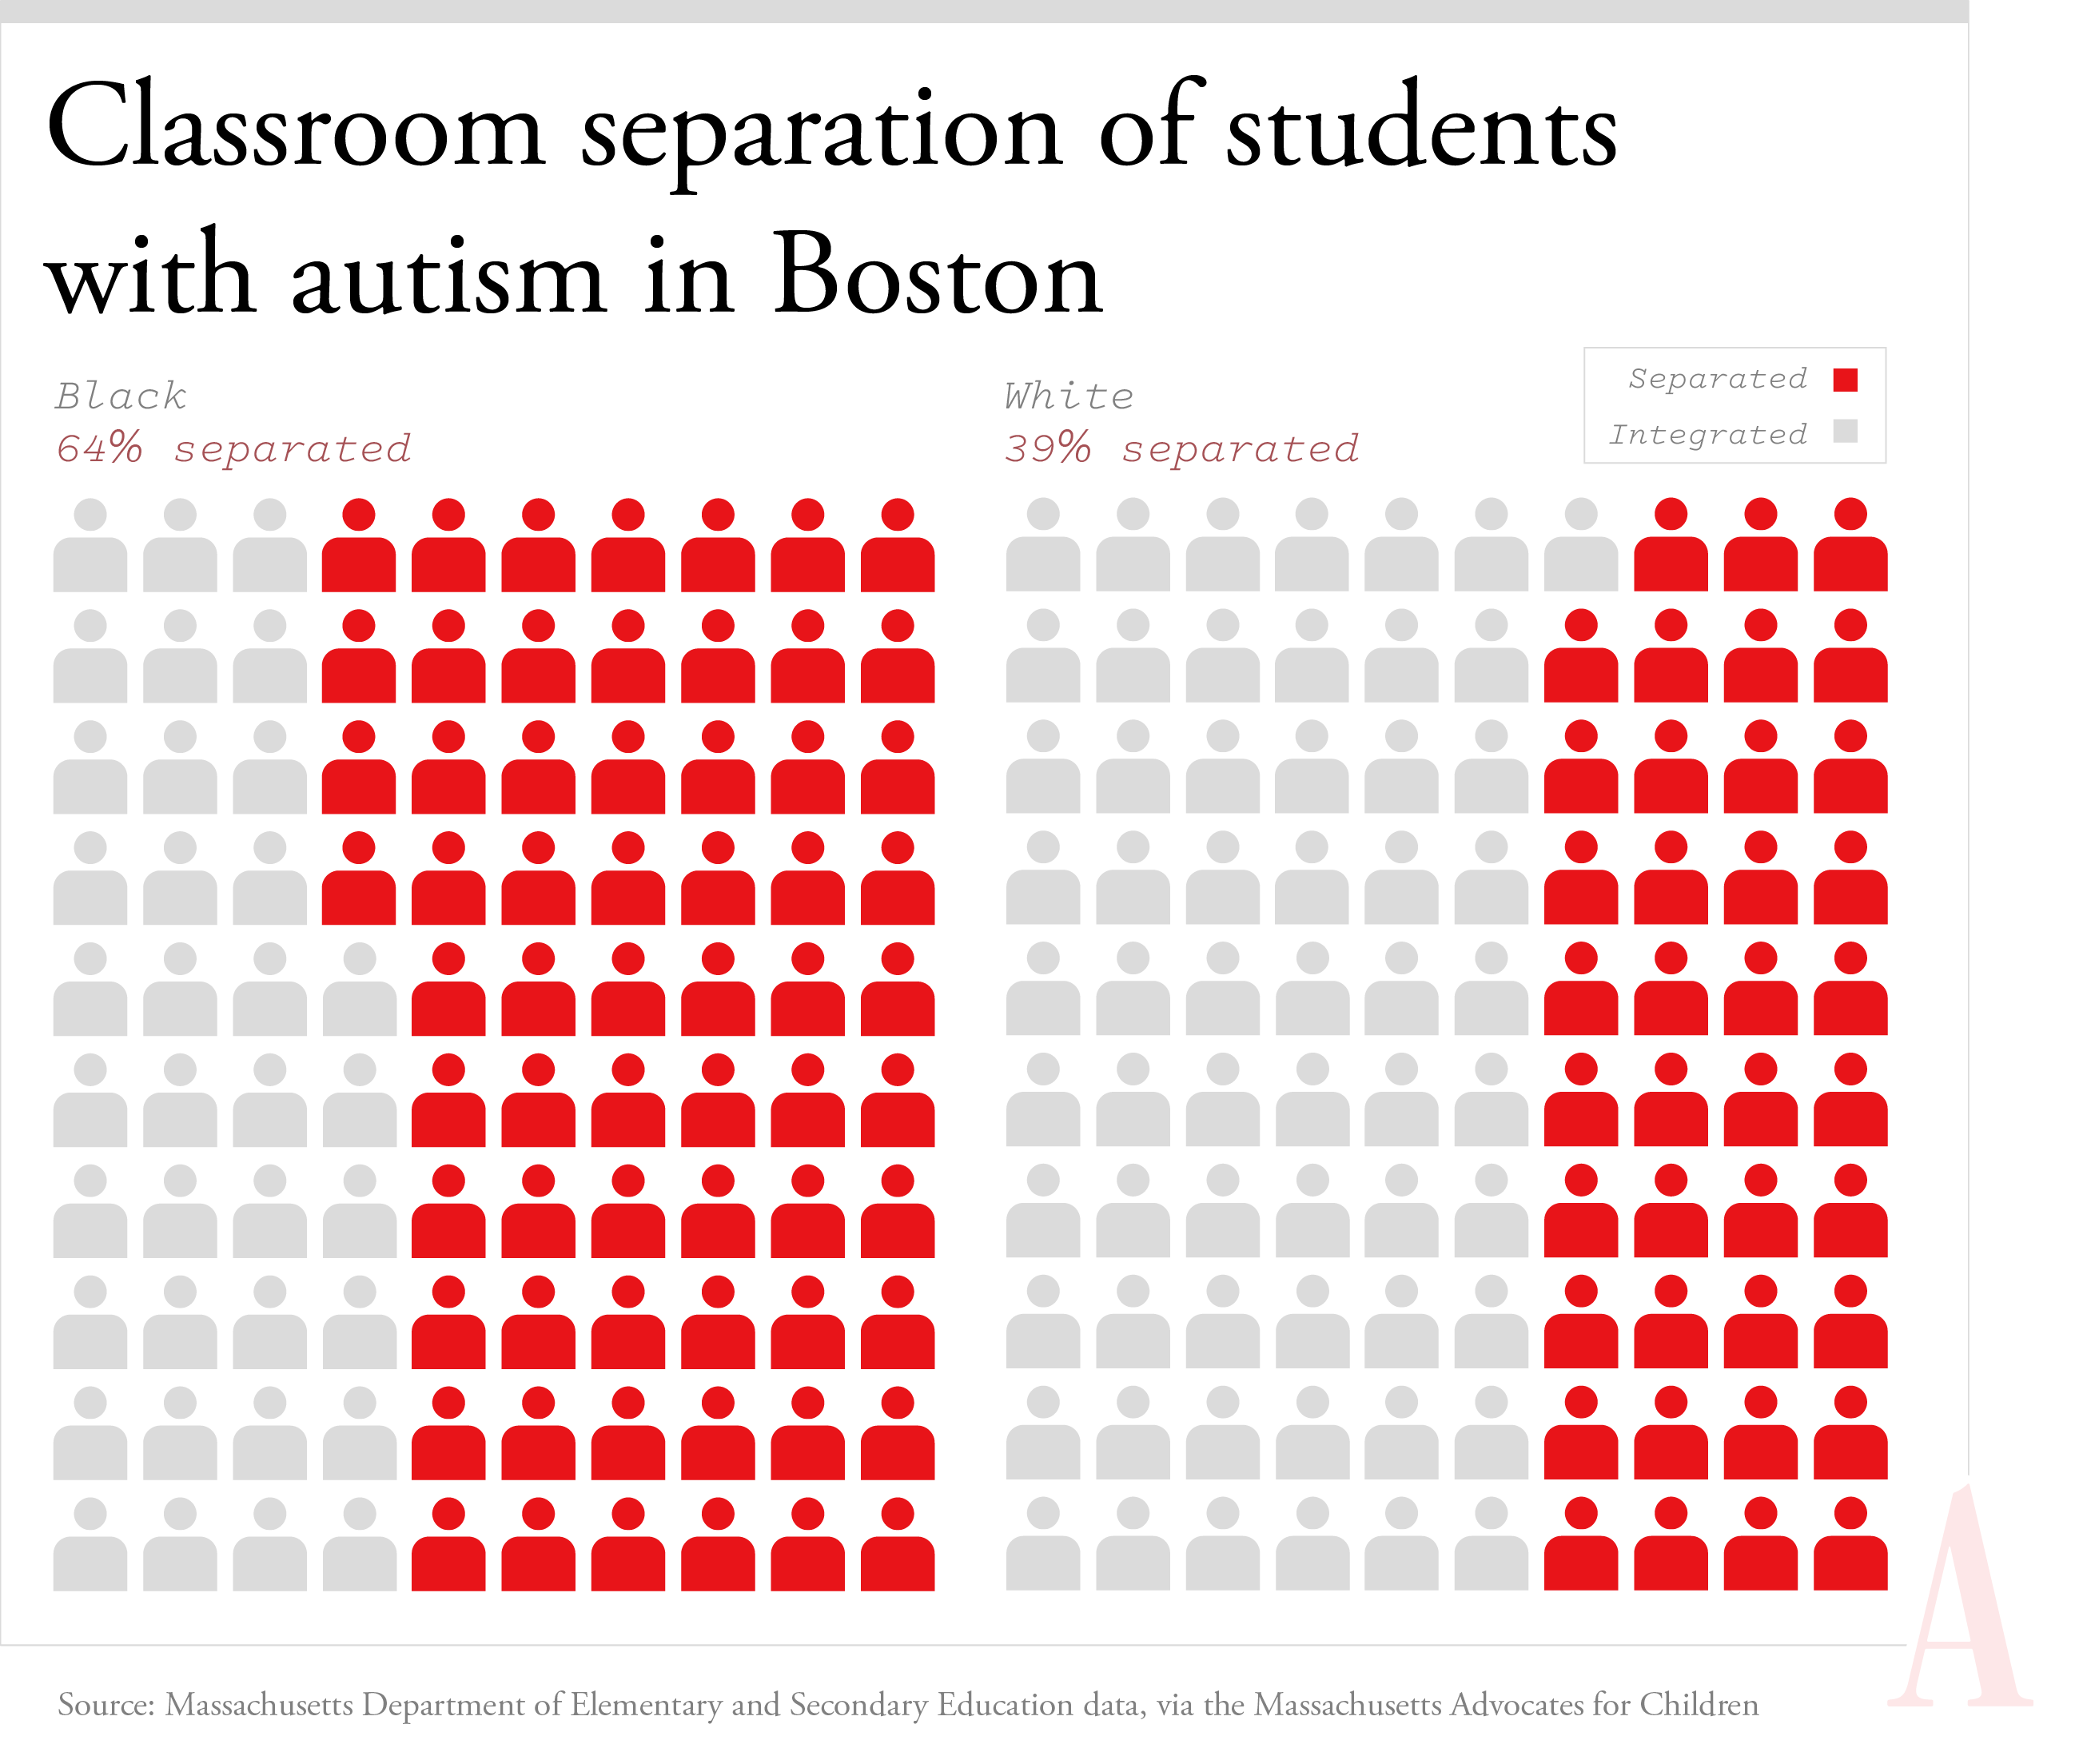 A visualization showing that 64 percent of Black students with Autism are separated while 39 percent of white students with autism are separated in Boston elementary and secondary schools